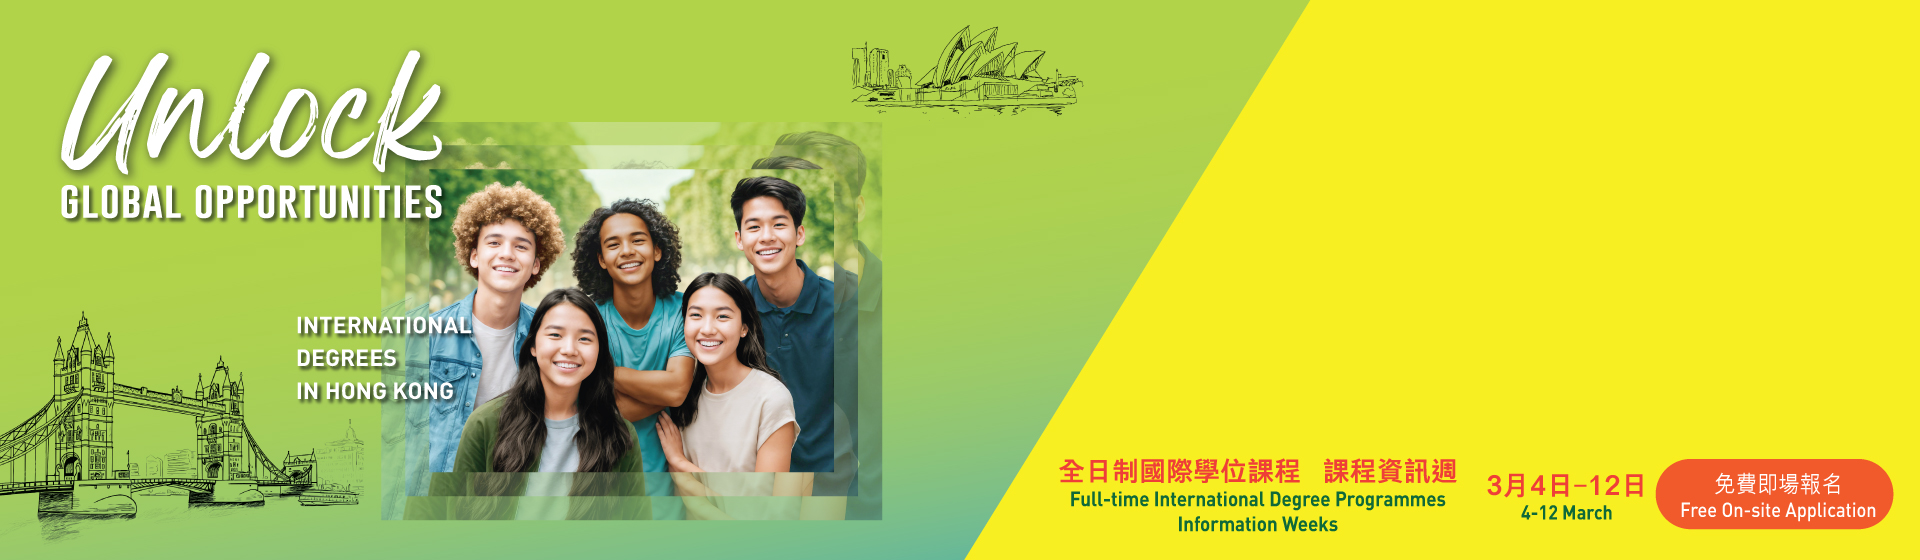 Unlock Global Opportunities - International Degrees in Hong Kong IC Information Weeks for International Degree Programmes in March